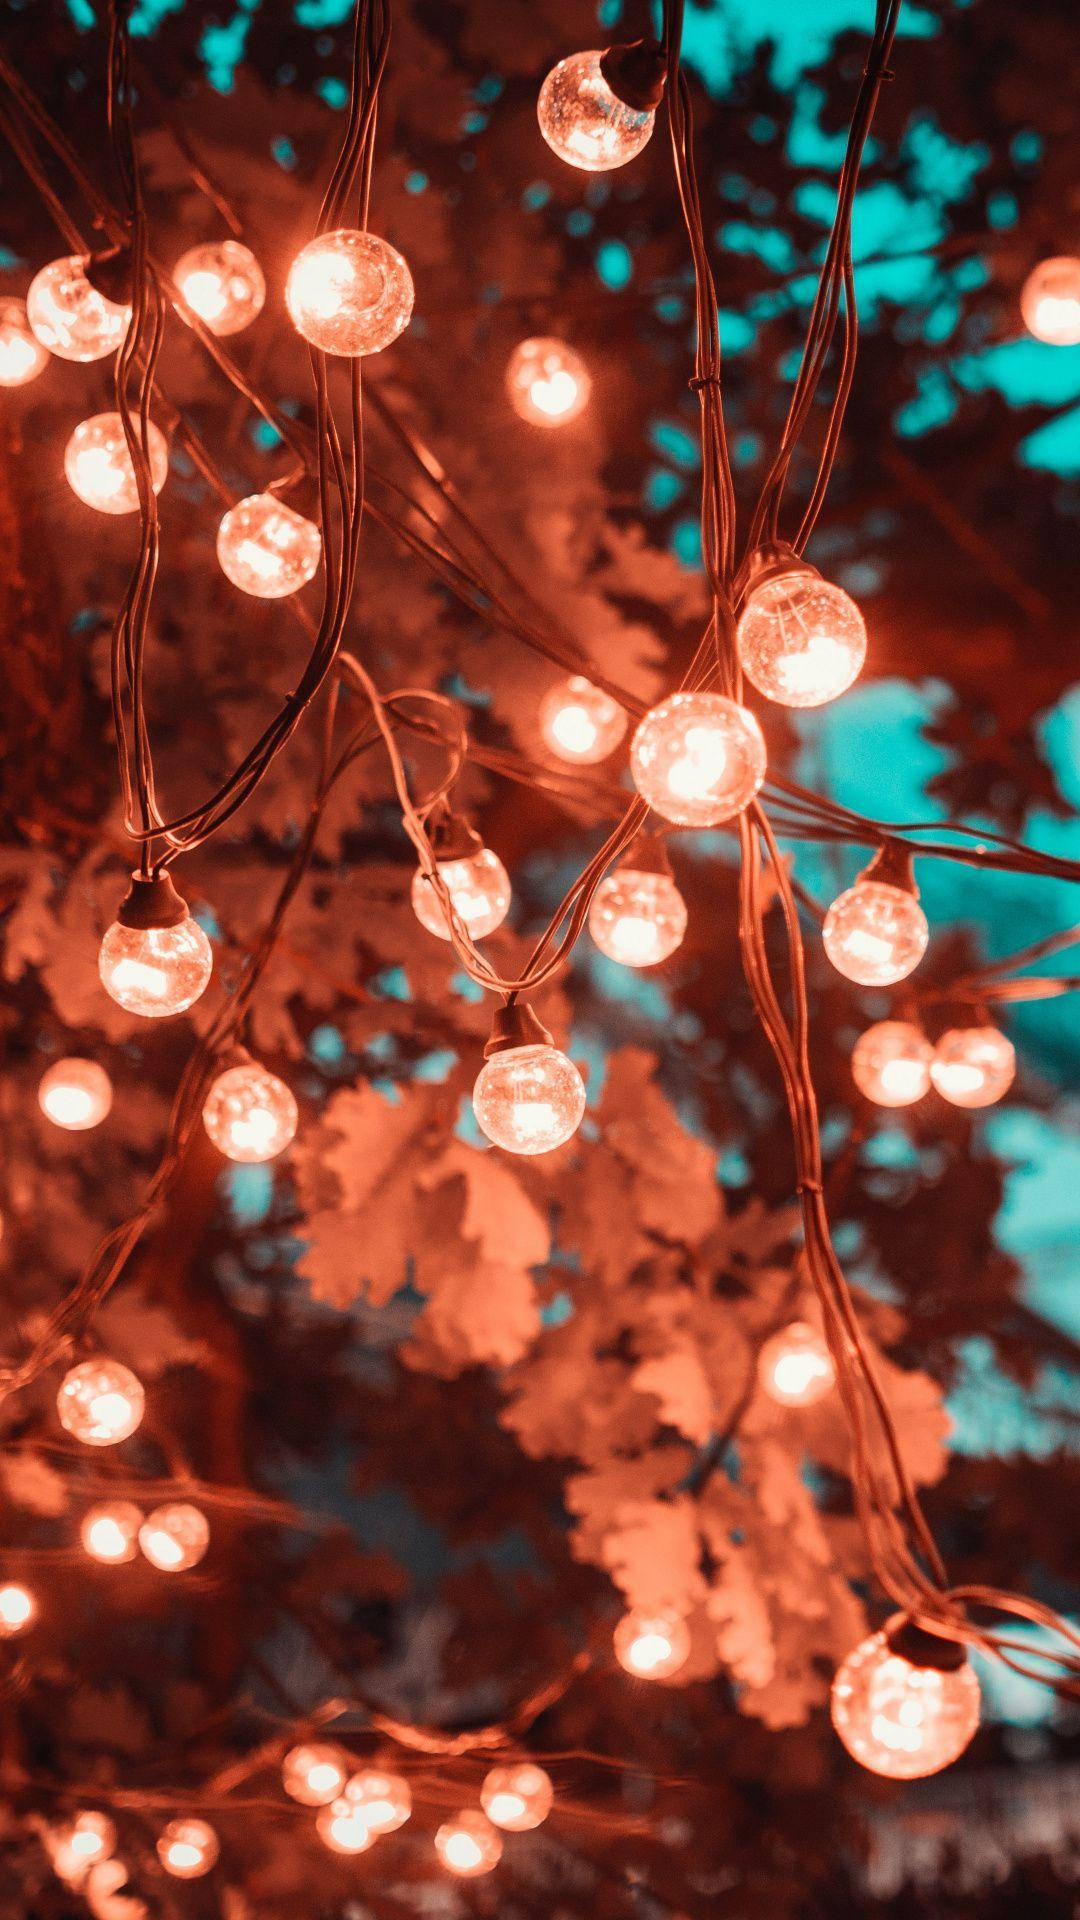 Spread the cheer this holiday season with festive Christmas lights! Wallpaper